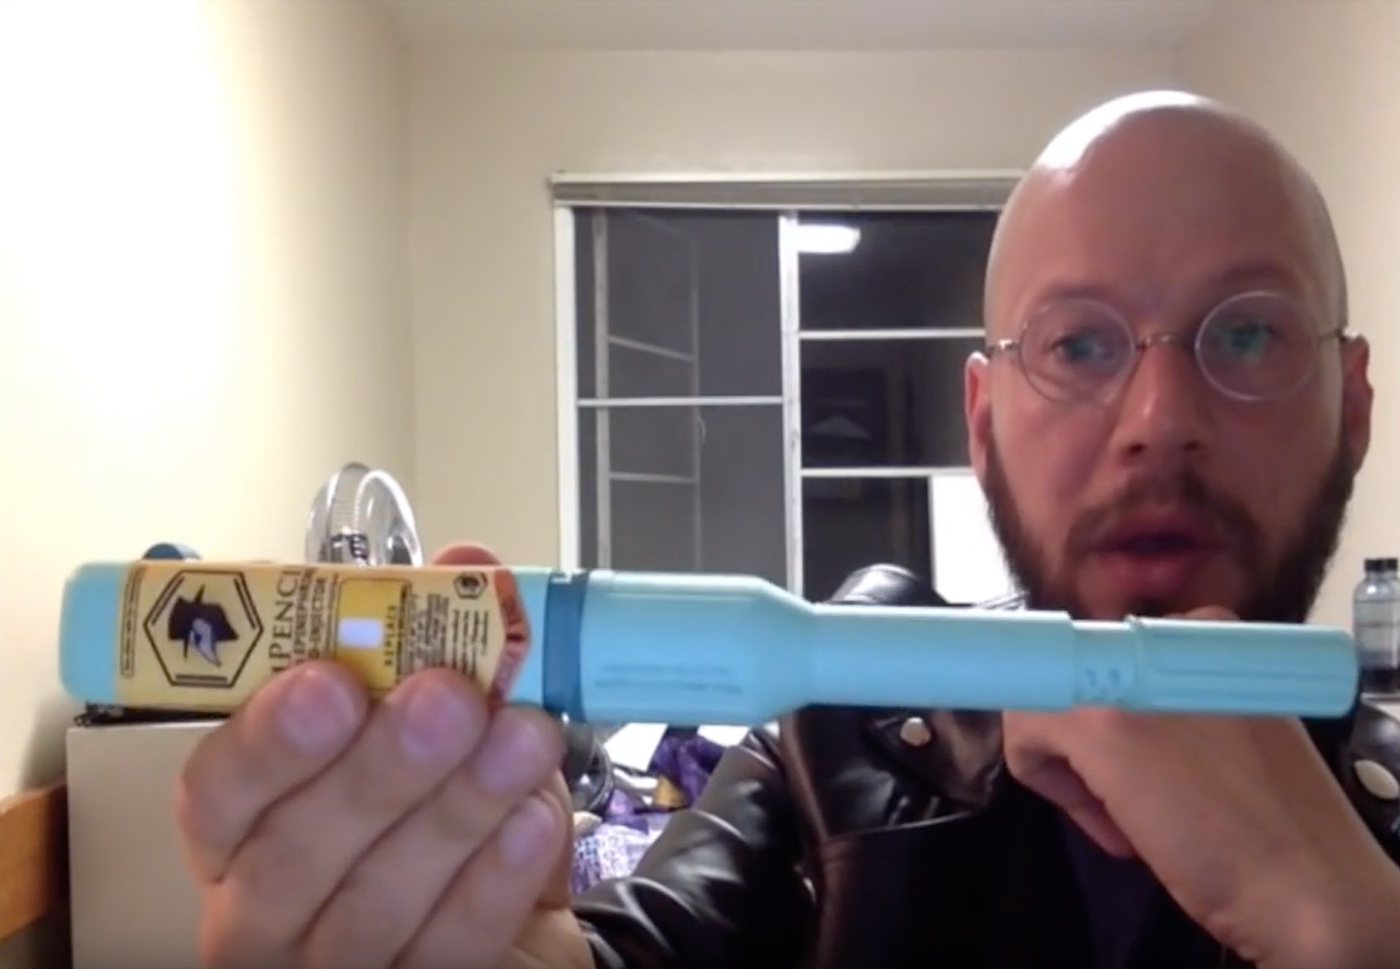 It may not look much, but Four Thieves Vinegar claims that the $30 home-brew EpiPencil works just as well as the official $300 EpiPen.